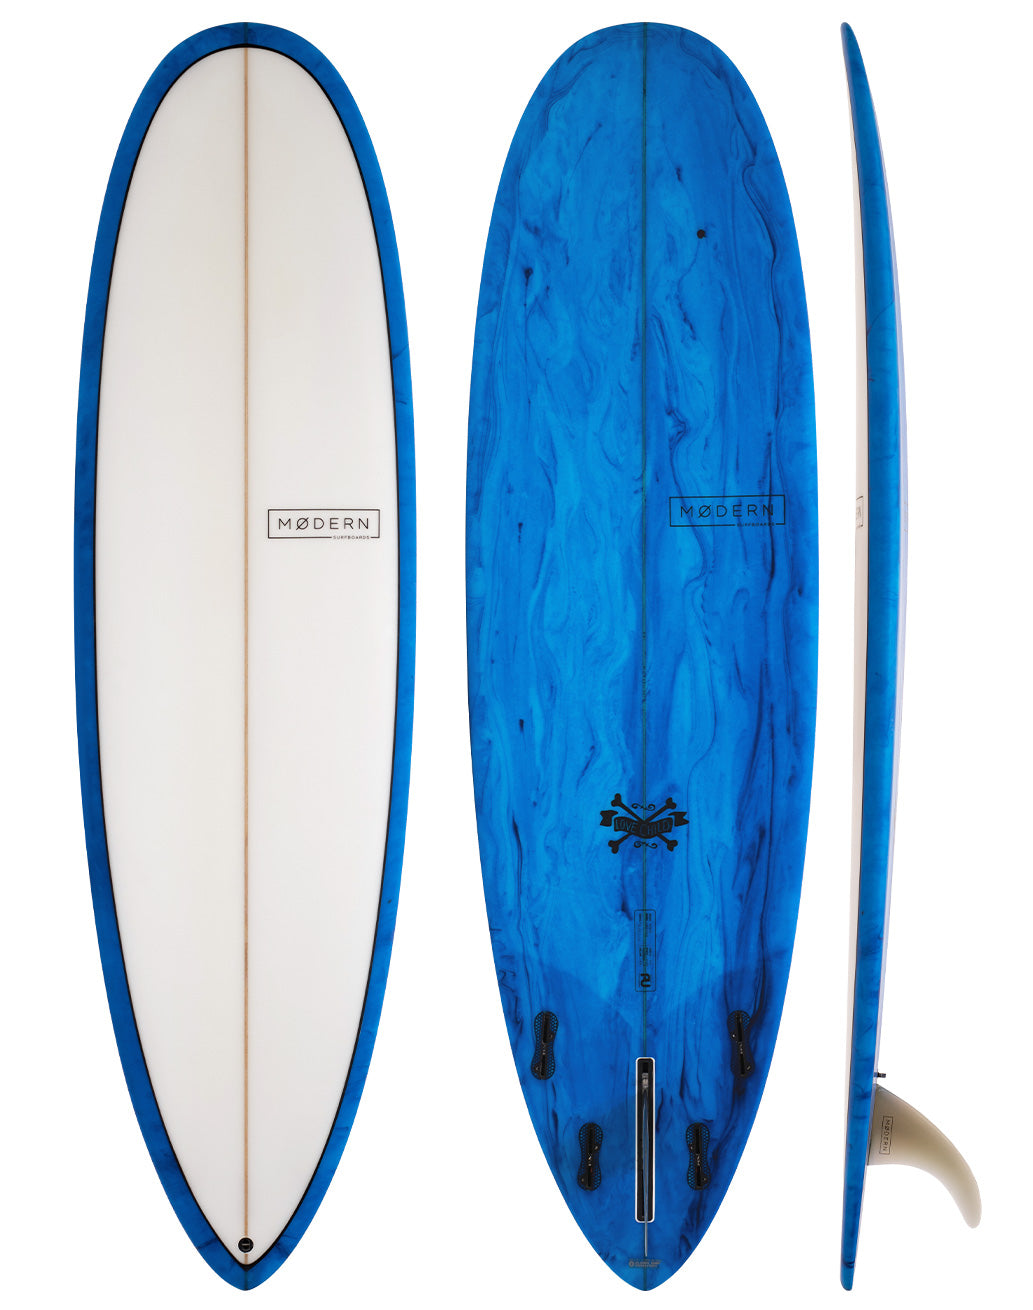 Modern Surfboards - Love Child - blue and white mid length surfboard